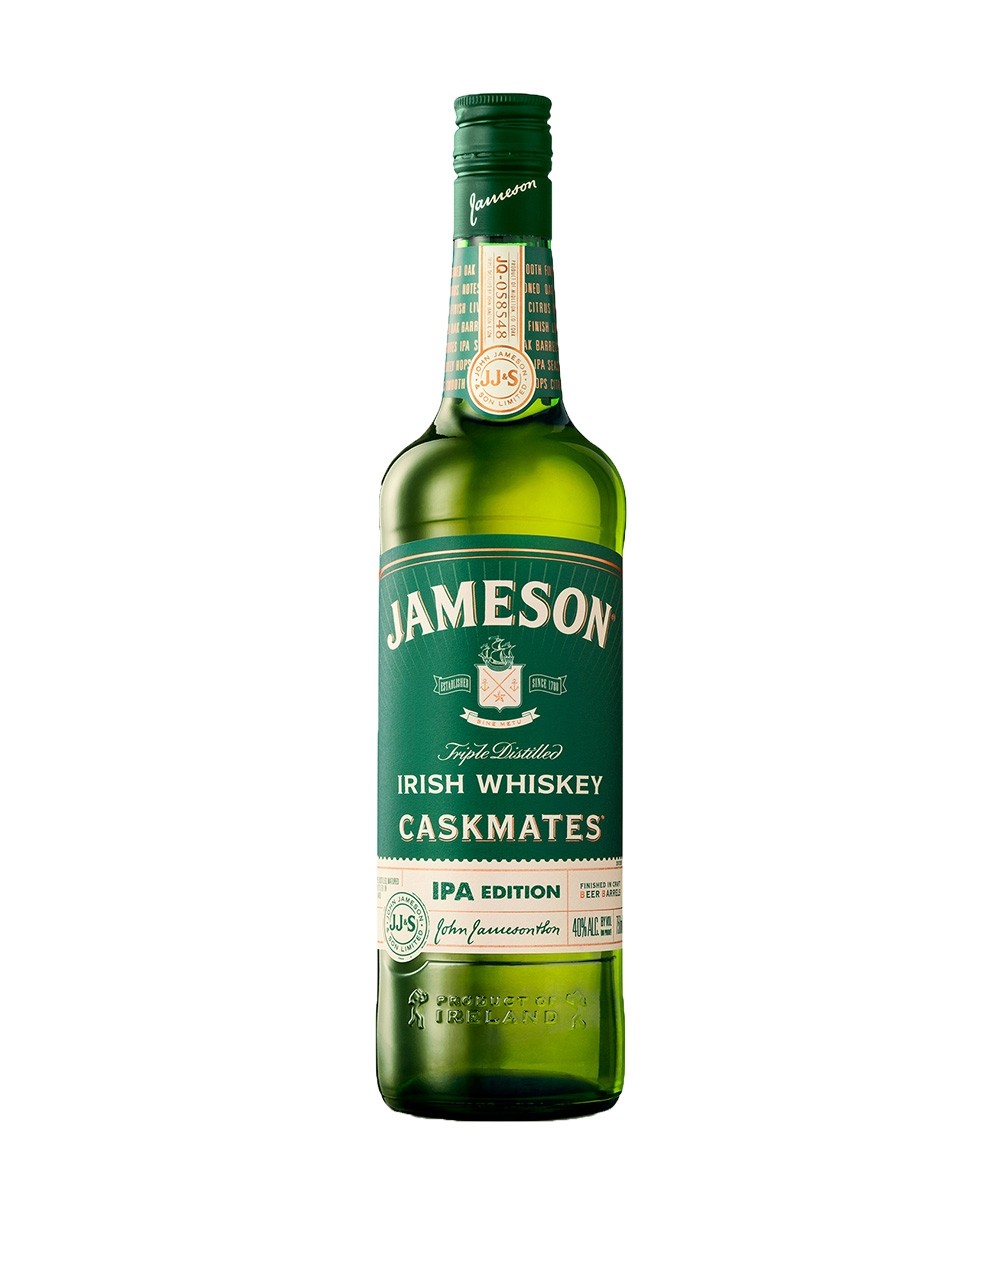 Jameson Caskmates IPA Edition | Buy Online or Send as a